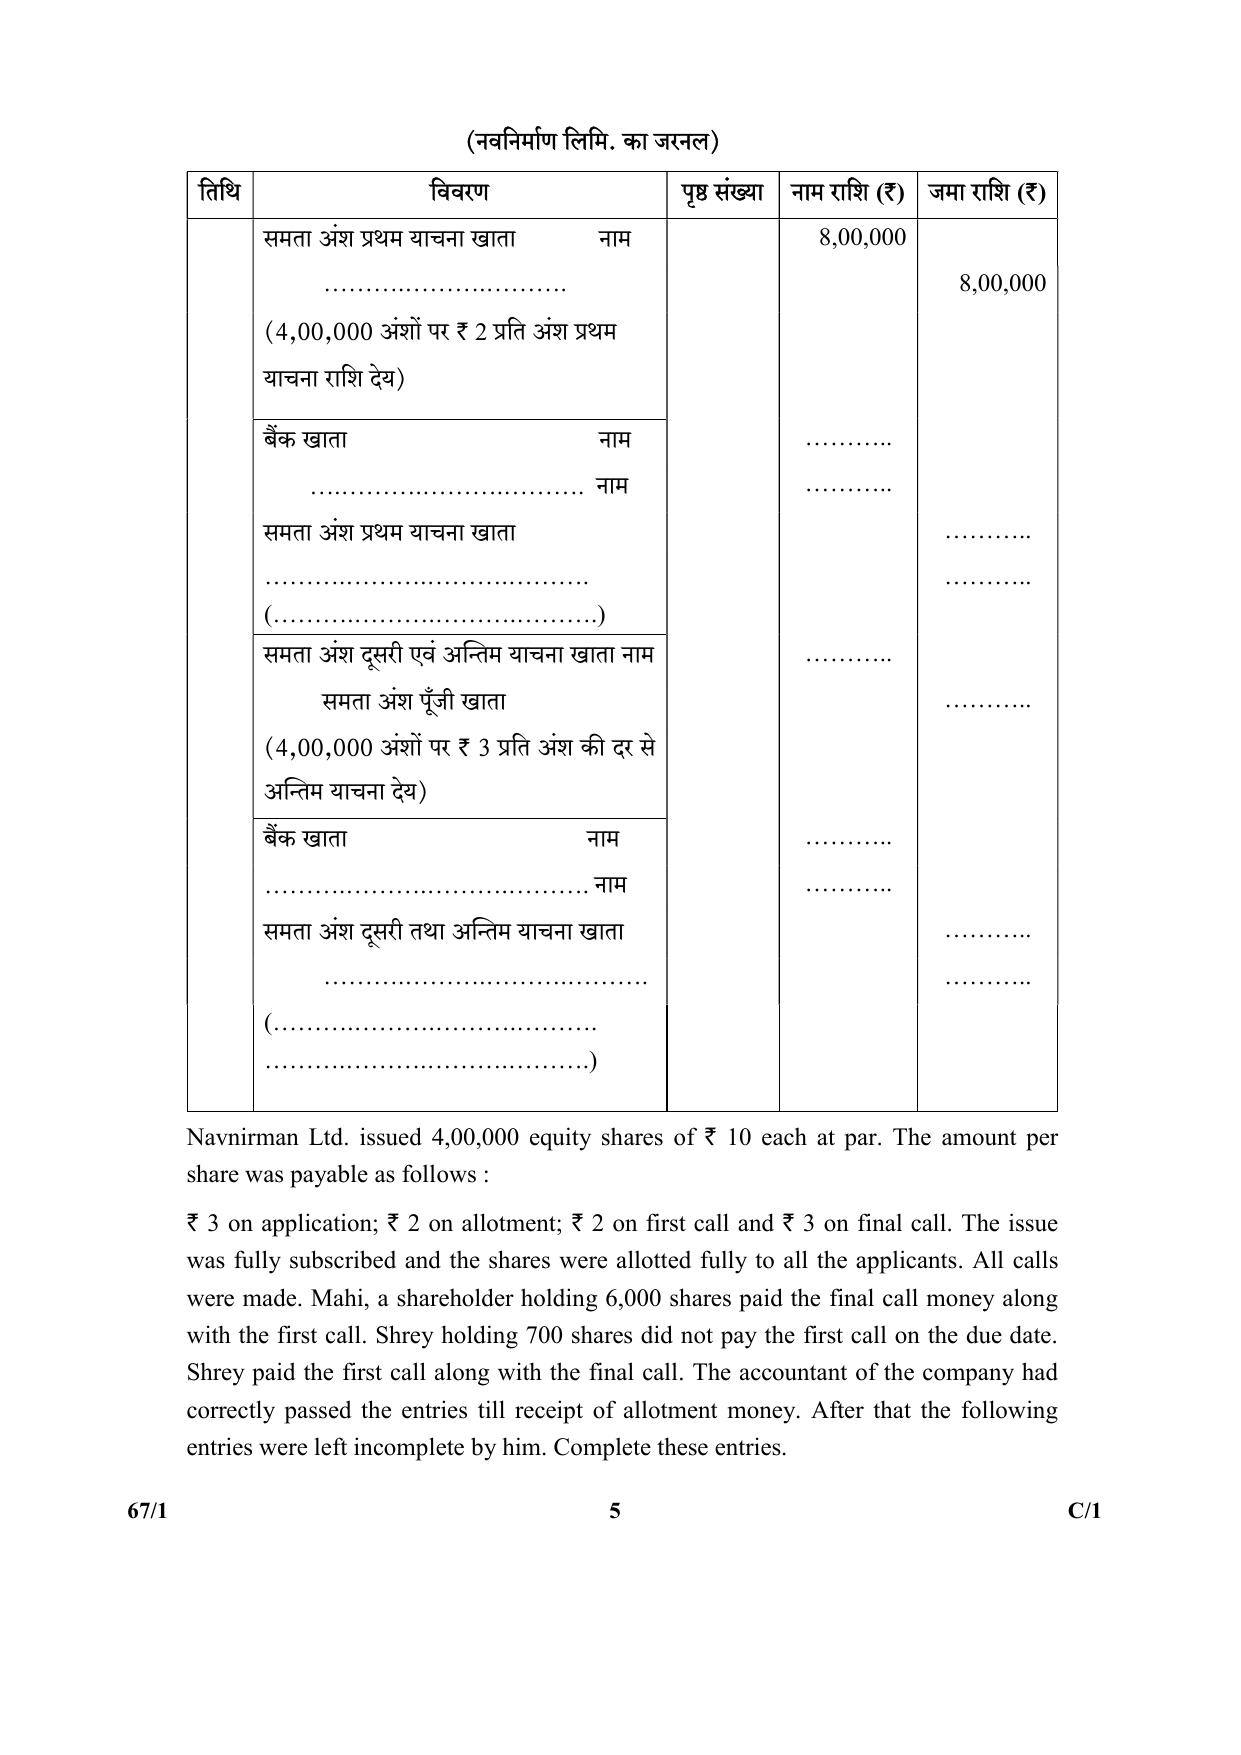 CBSE Class 12 67-1  (Accountancy) 2018 Compartment Question Paper - Page 5